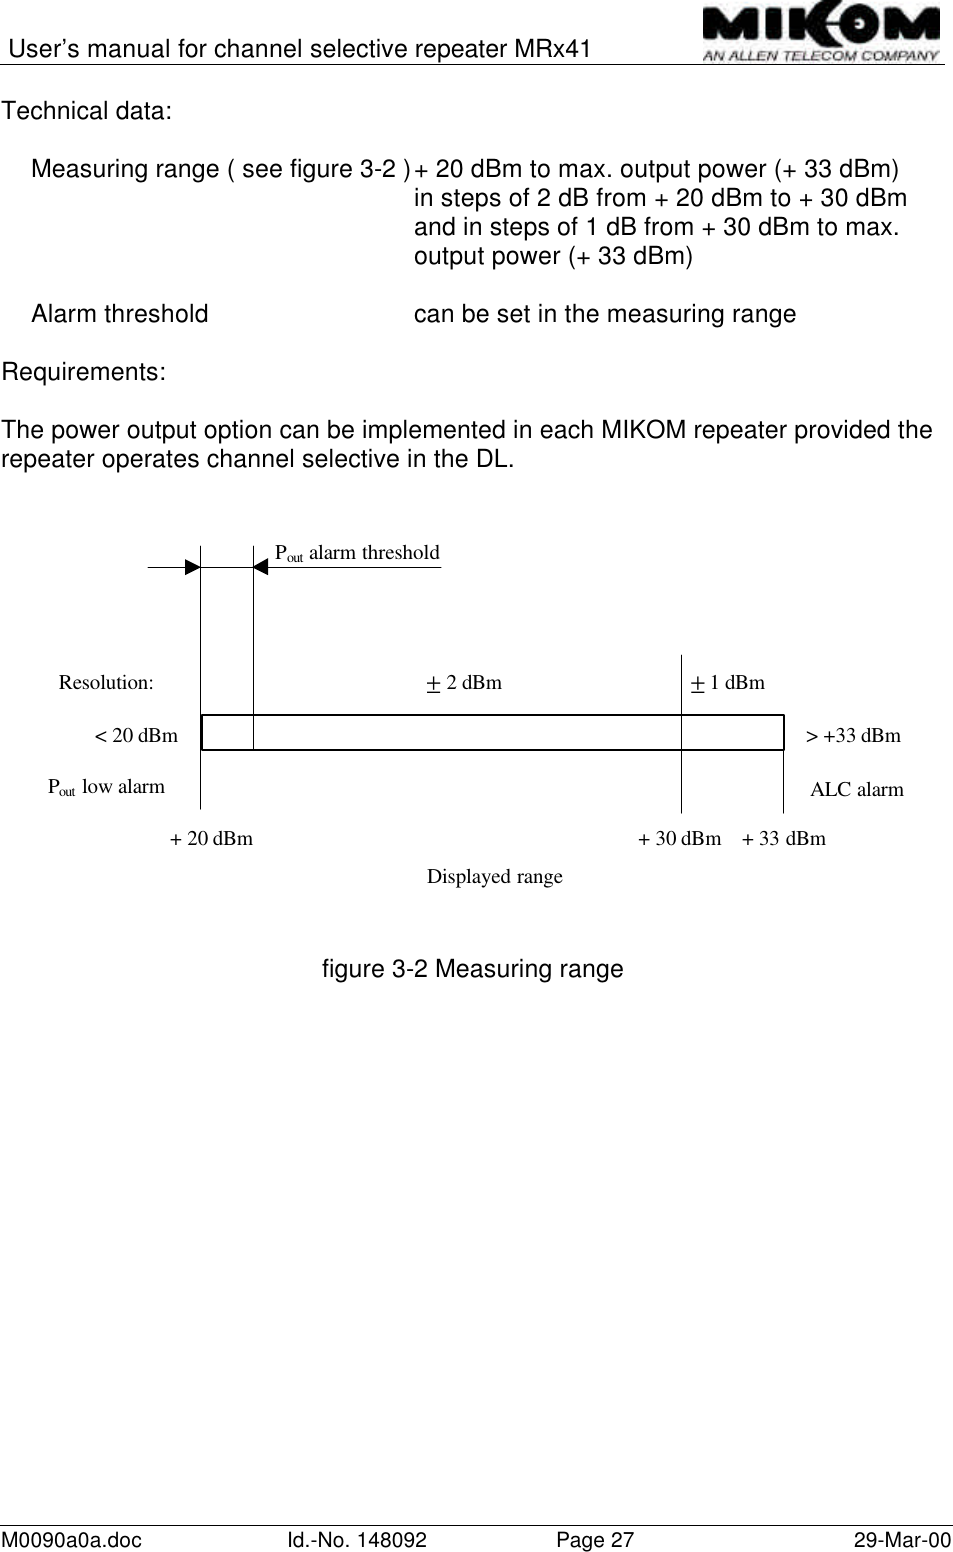 User’s manual for channel selective repeater MRx41M0090a0a.doc Id.-No. 148092 Page 27 29-Mar-00Technical data:Measuring range ( see figure 3-2 )+ 20 dBm to max. output power (+ 33 dBm)in steps of 2 dB from + 20 dBm to + 30 dBmand in steps of 1 dB from + 30 dBm to max.output power (+ 33 dBm)Alarm threshold can be set in the measuring rangeRequirements:The power output option can be implemented in each MIKOM repeater provided therepeater operates channel selective in the DL.figure 3-2 Measuring range+ 20 dBm      + 30 dBm    + 33 dBmResolution: ± 2 dBm         ± 1 dBm&lt; 20 dBm          &gt; +33 dBmDisplayed rangePout low alarmALC alarmPout alarm threshold